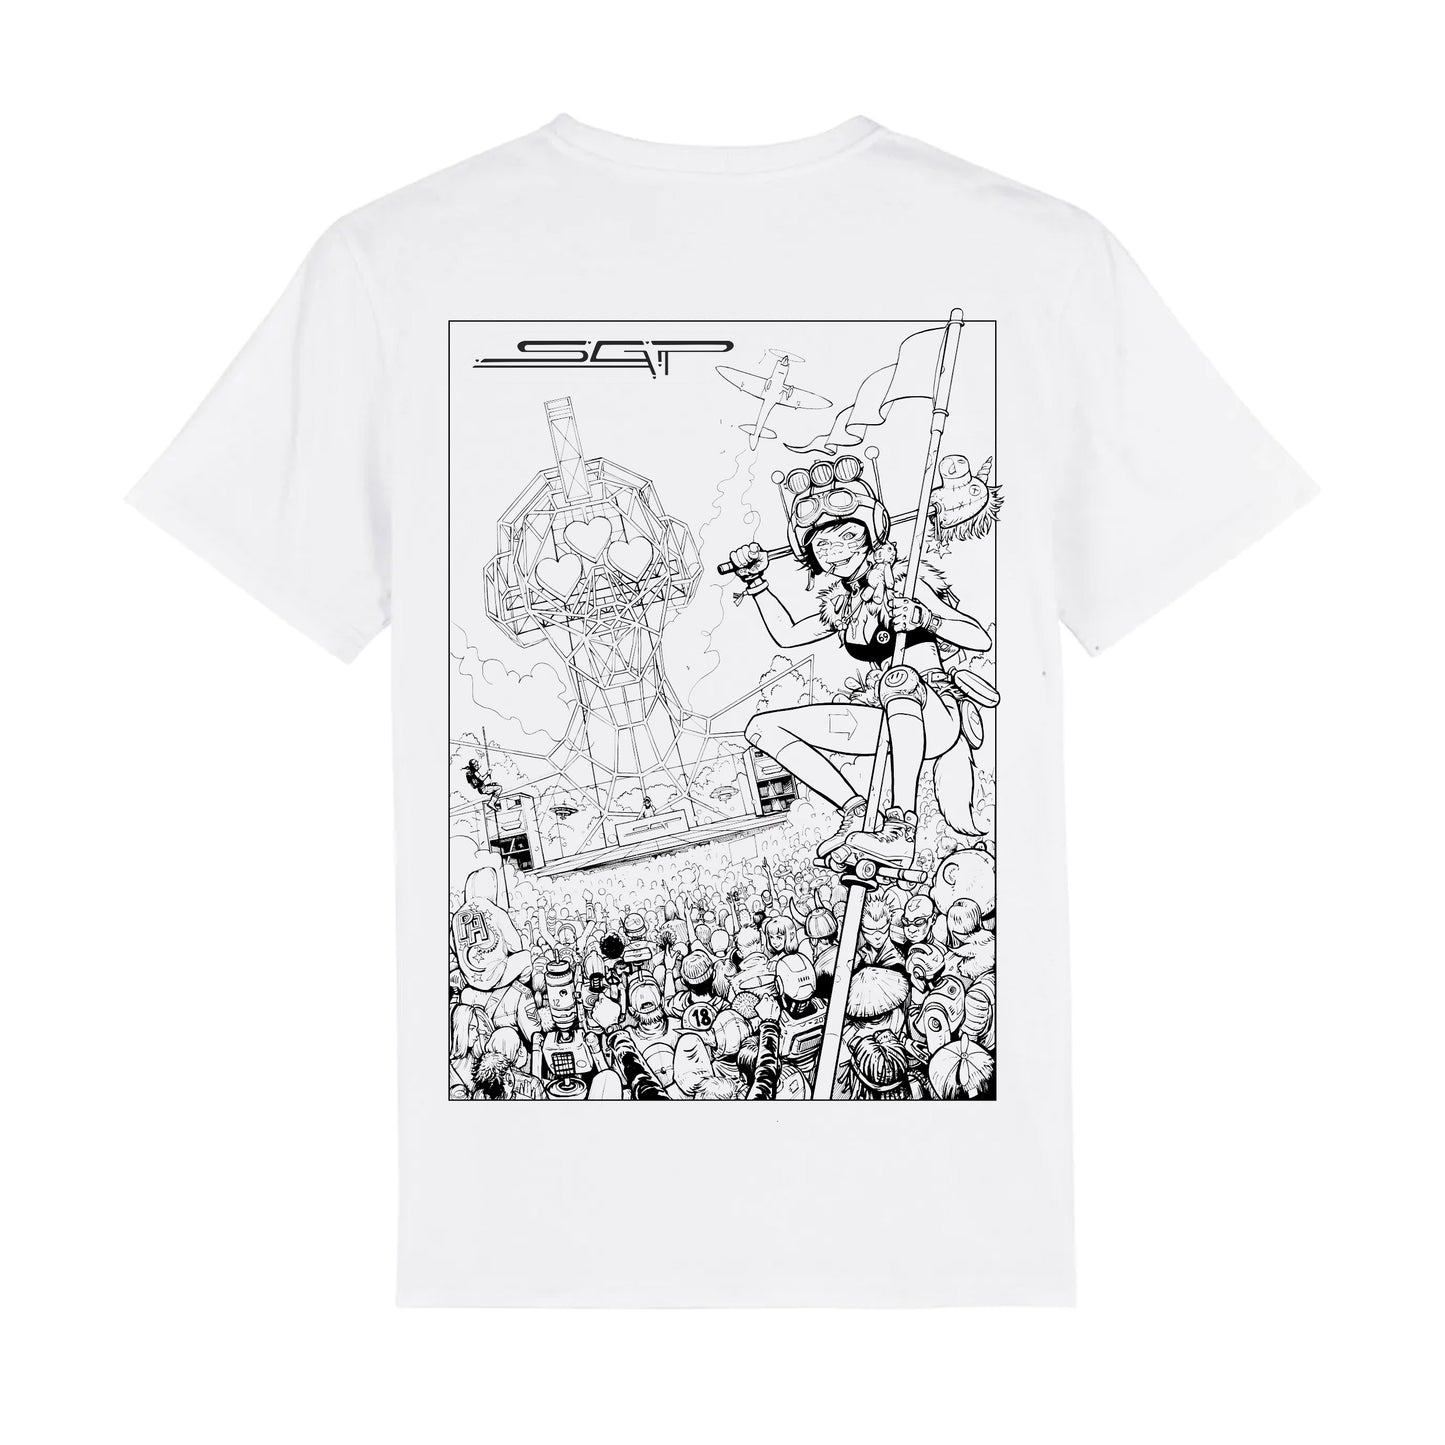 Secret Garden Party x Play Attention - A Stage Ahead T-Shirt & Poster Bundle